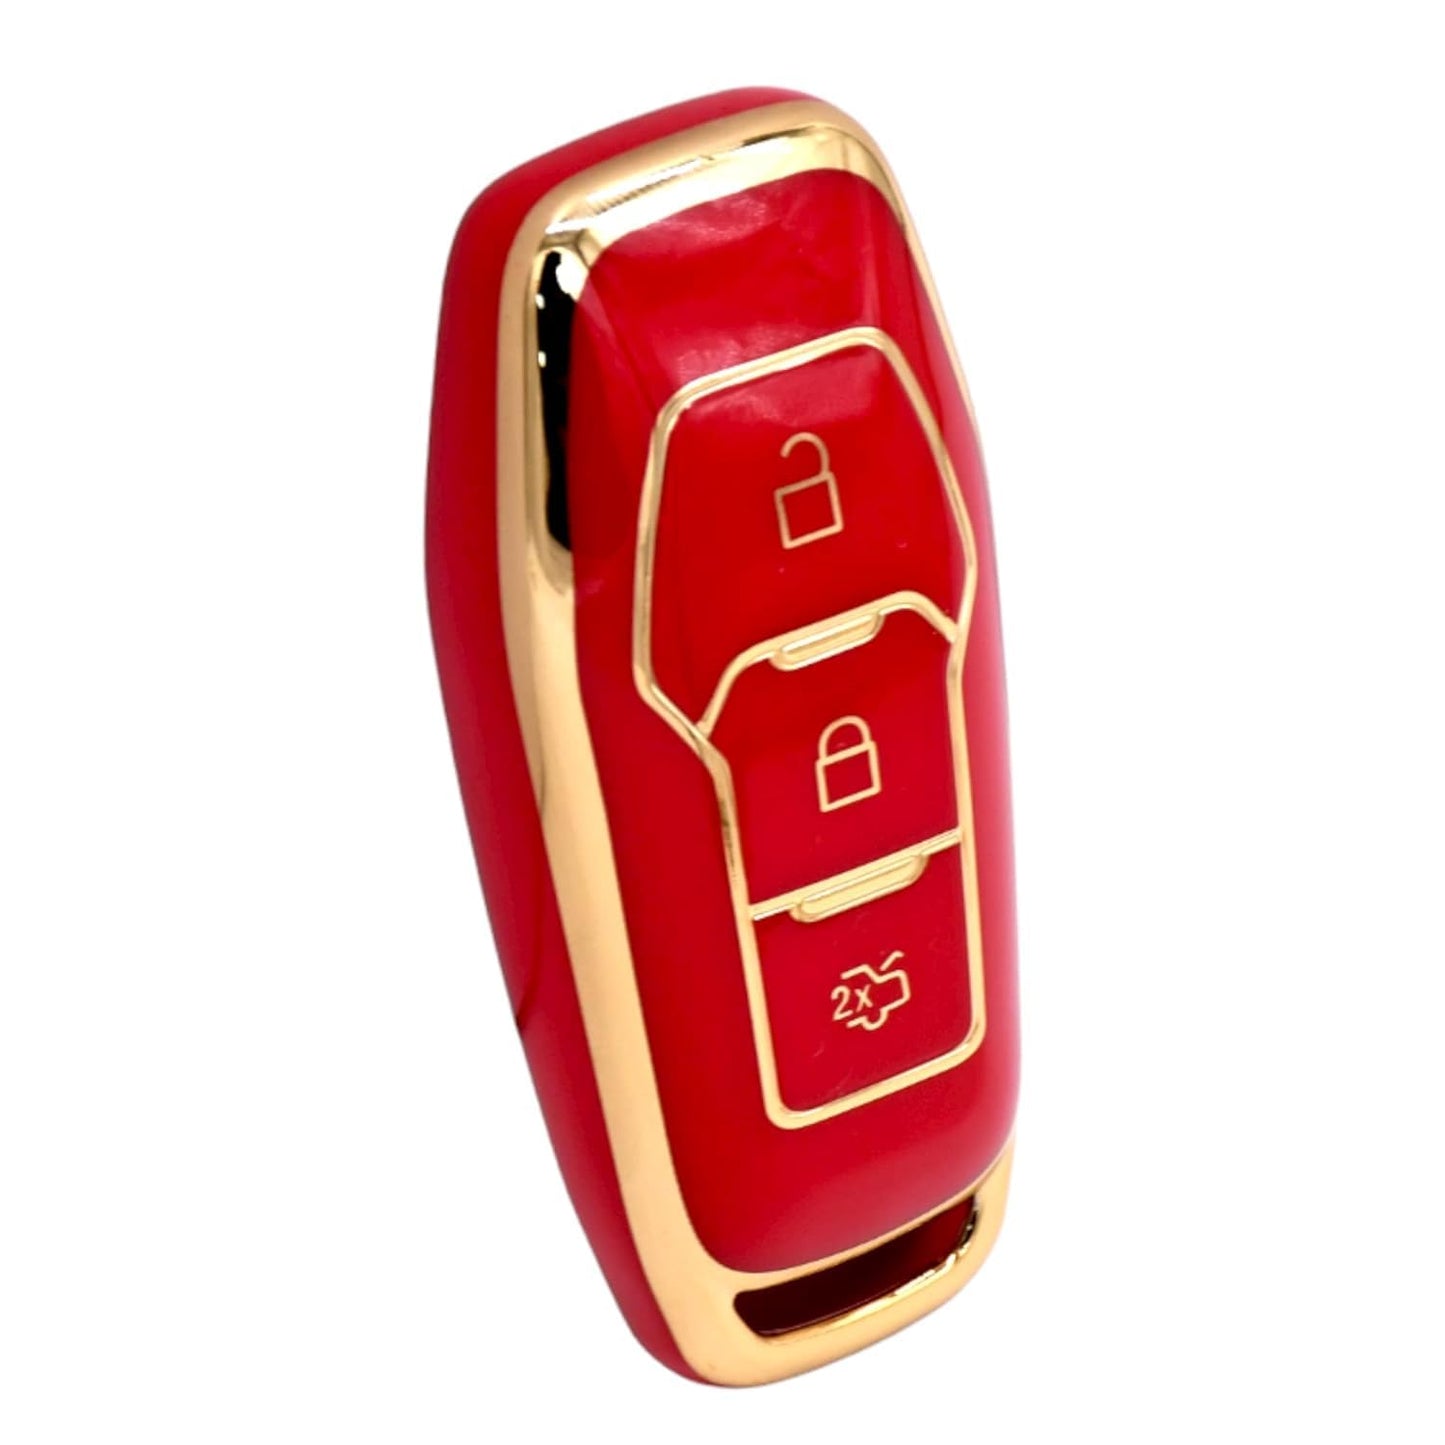 
                  
                    KMH - TPU Gold Car Key Cover Compatible with Jeep Compass Trailhawk 3 Push Button Smart Key Cover (Pack of 2 | Black-Red)-TPU GOLD KEY COVER-KMH-CARPLUS
                  
                